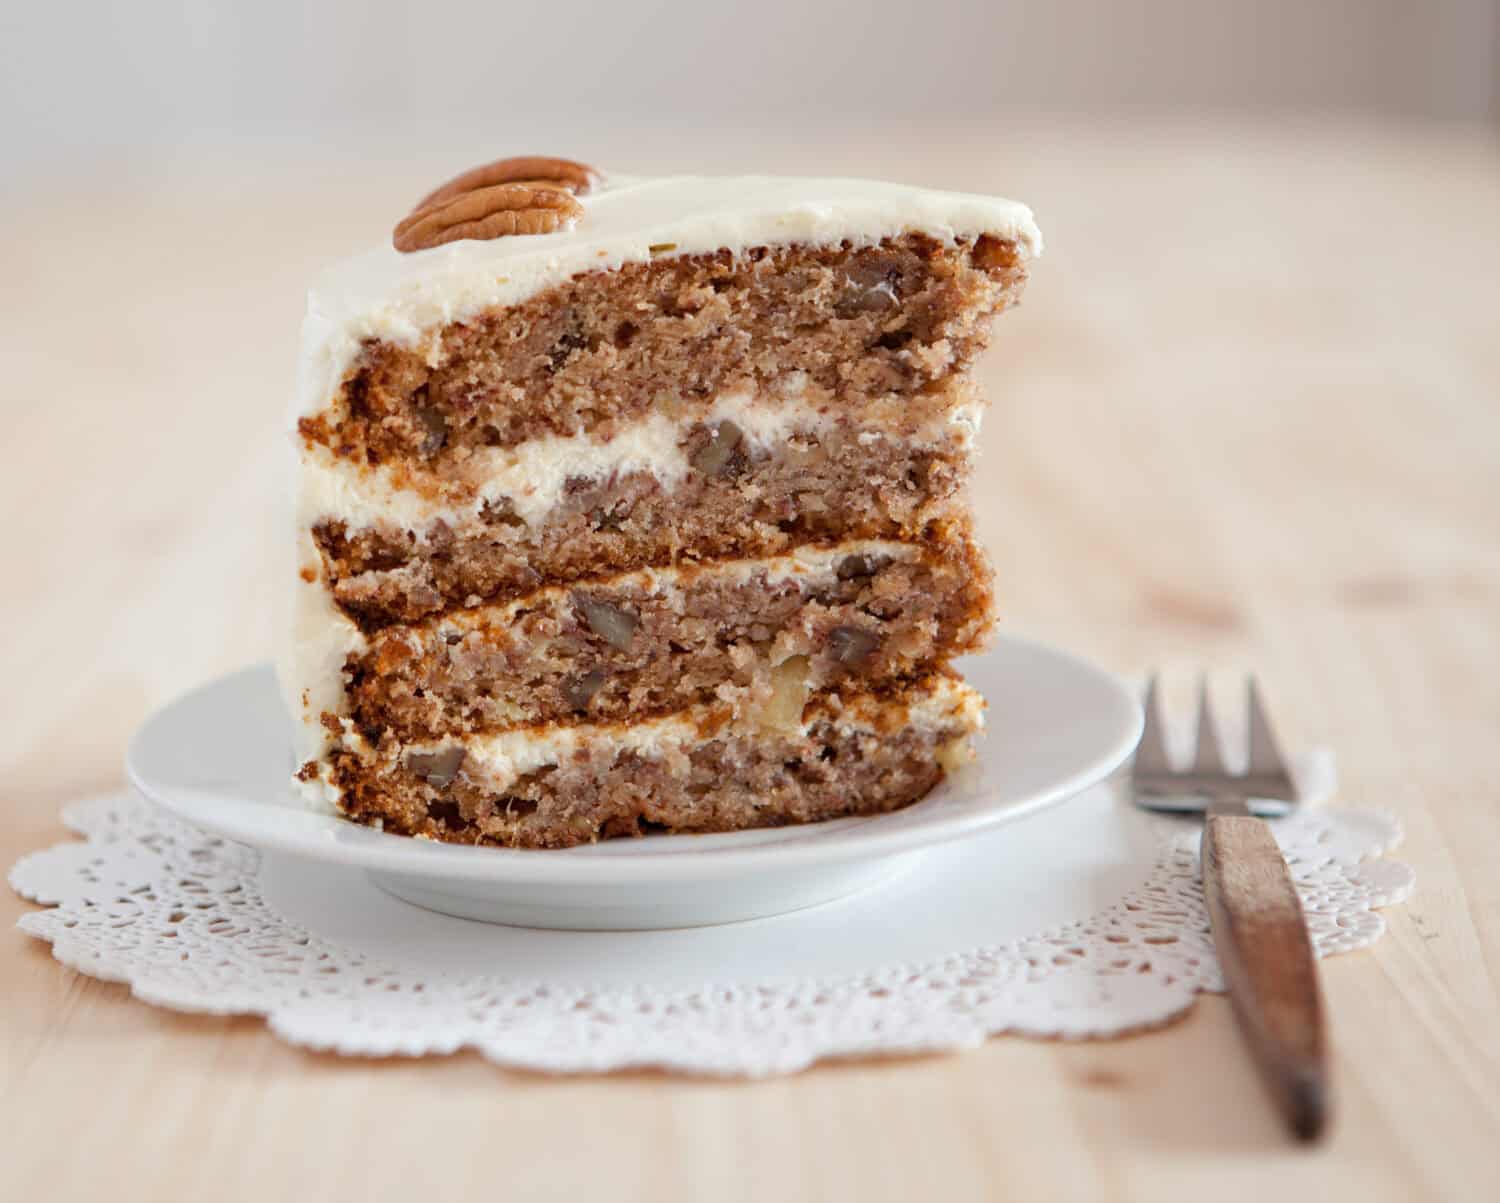 A single piece of Hummingbird cake with pecans and cream cheese frosting, selective focus